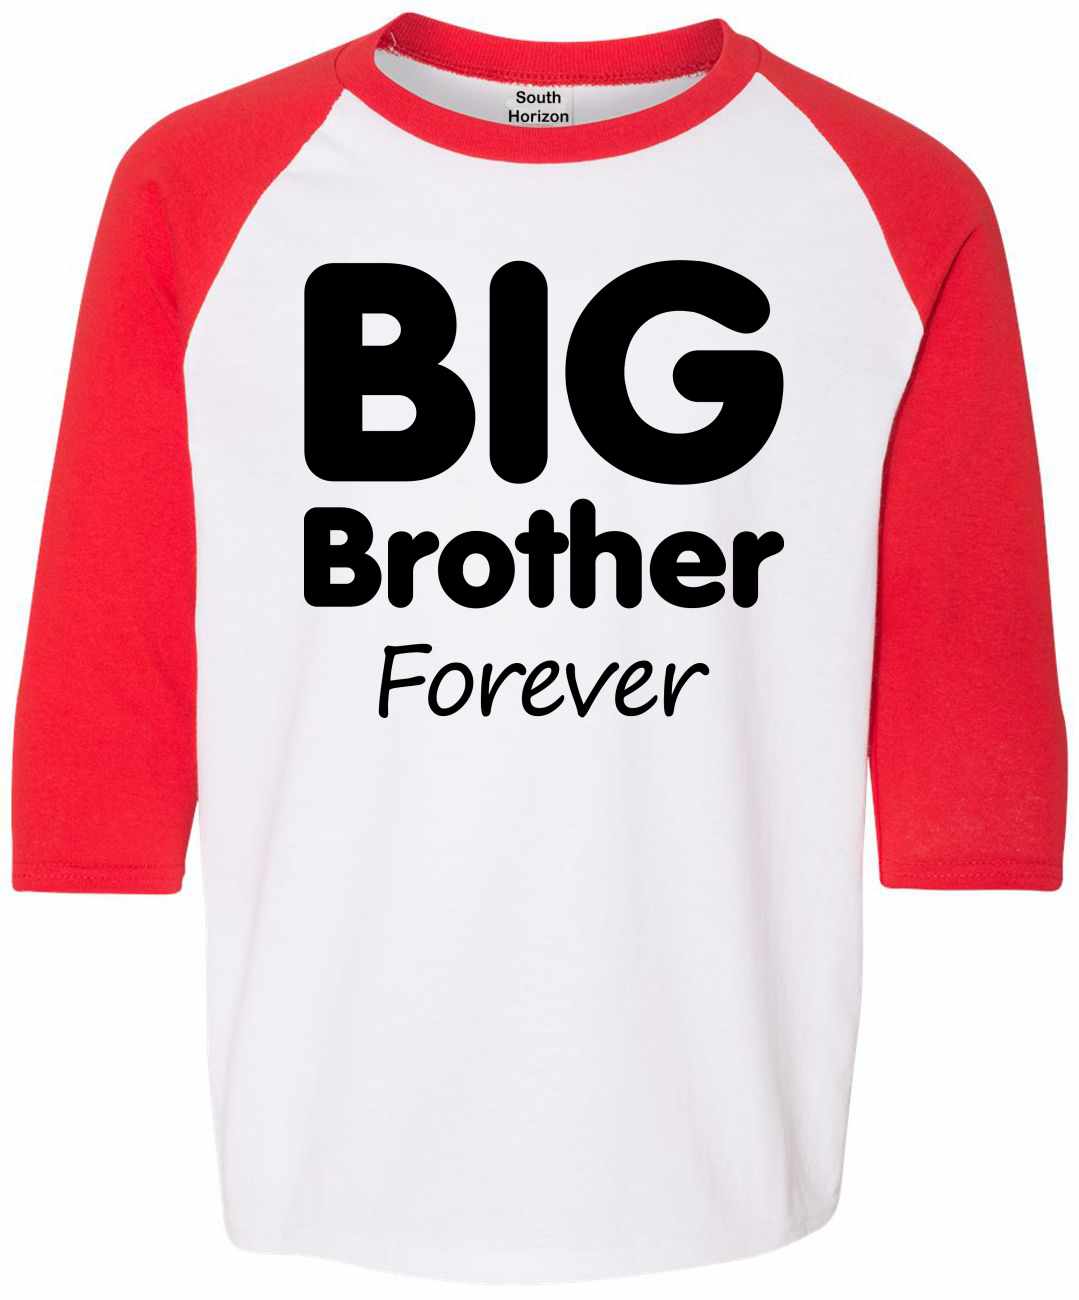 Big Brother Forever on Youth Baseball Shirt